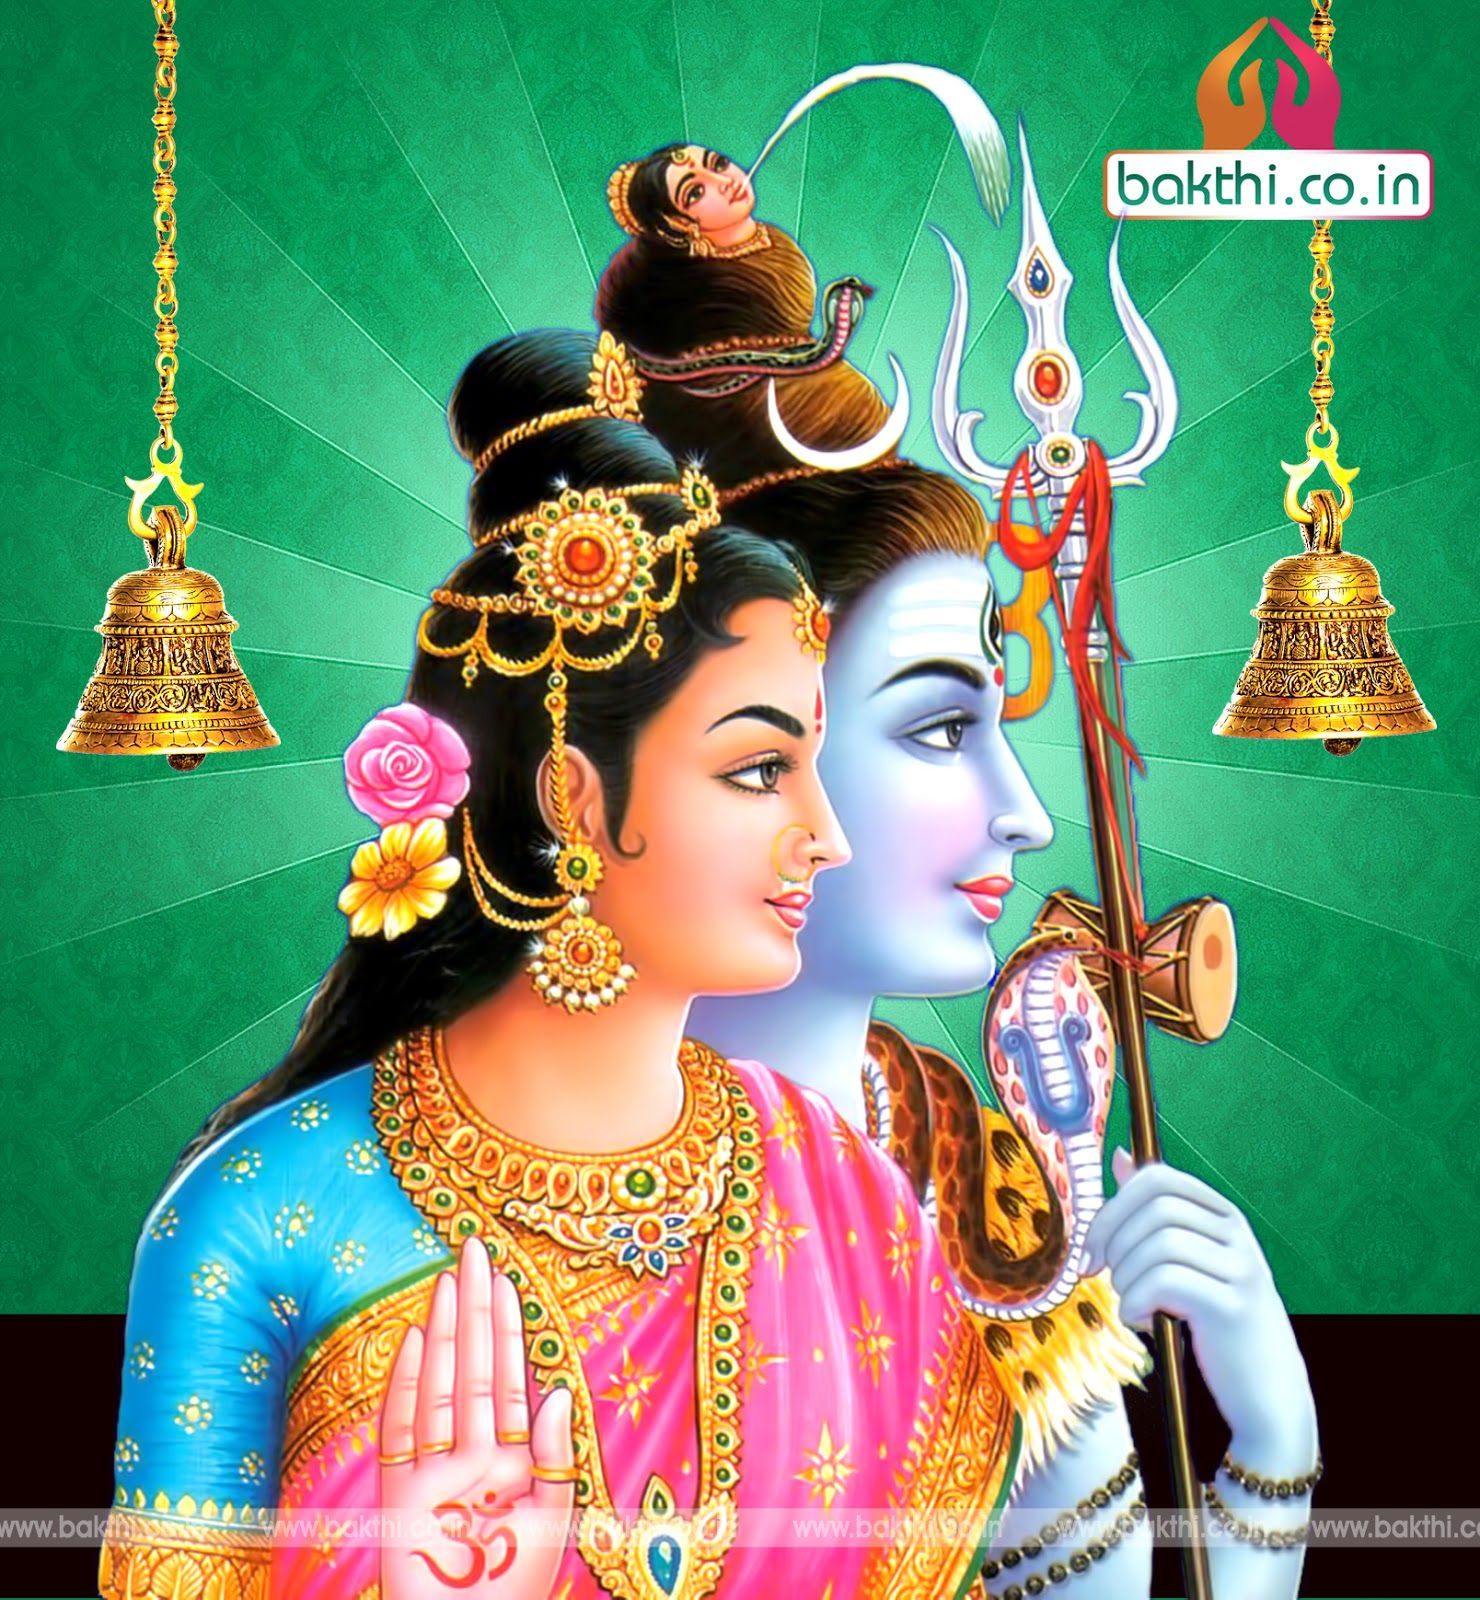 lord shiva parvati images hd free download